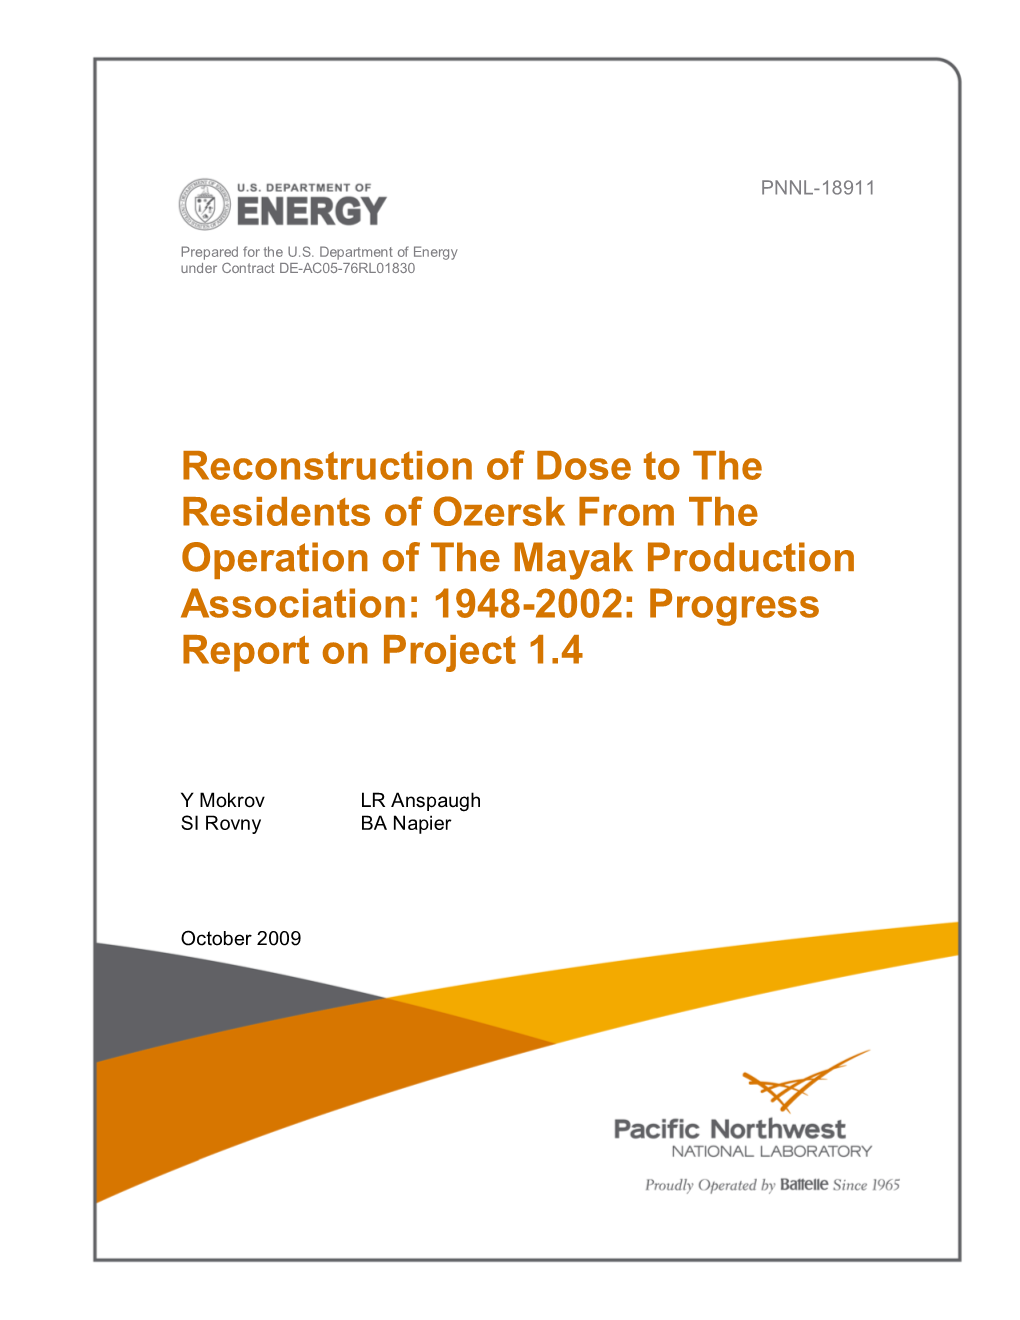 Reconstruction of Dose to the Residents of Ozersk from the Operation of the Mayak Production Association: 1948-2002: Progress Report on Project 1.4